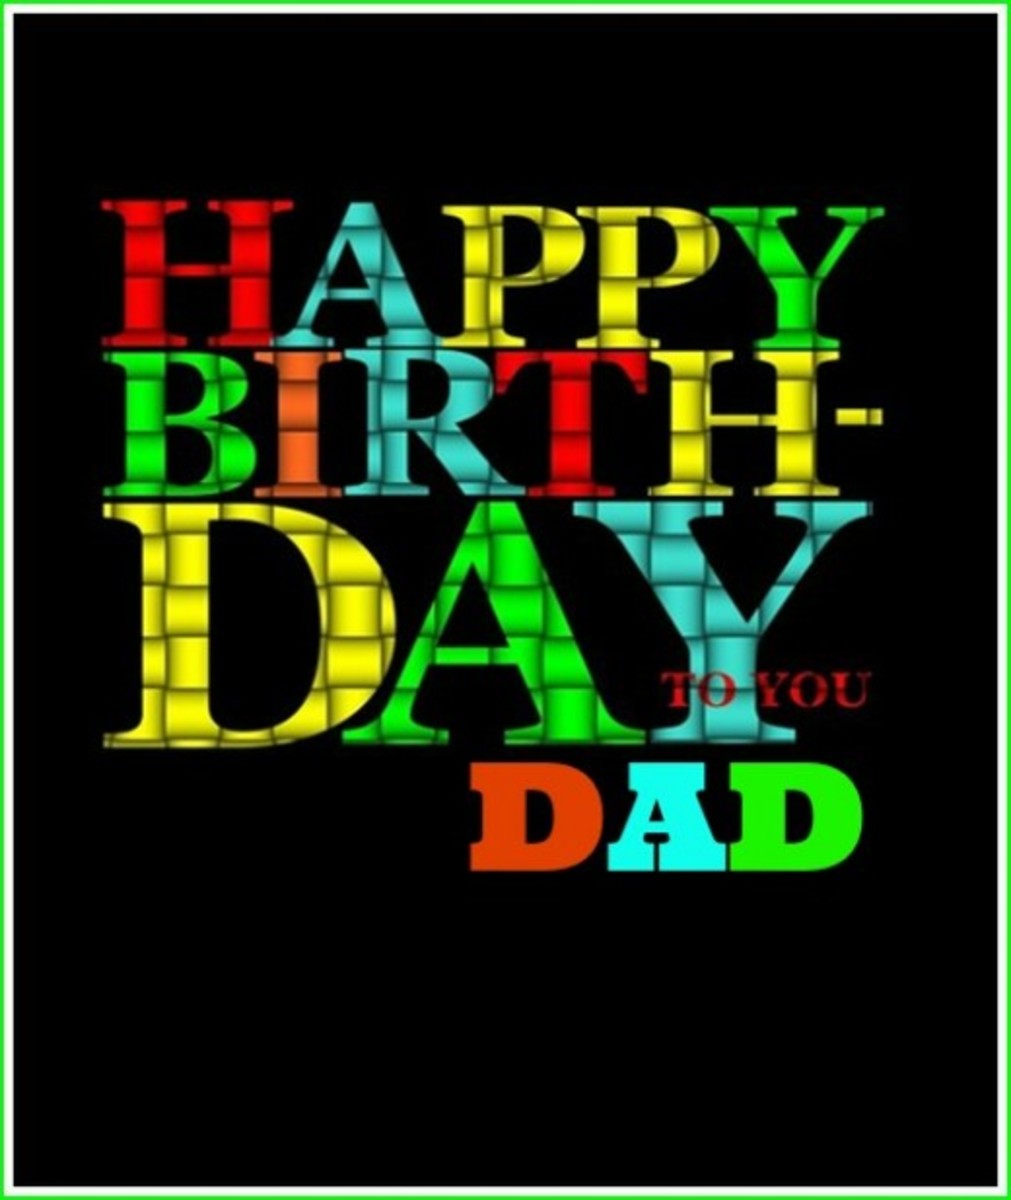 HAPPY BIRTHDAY DAD | Free Birthday Greetings, Cards & Messages - HubPages